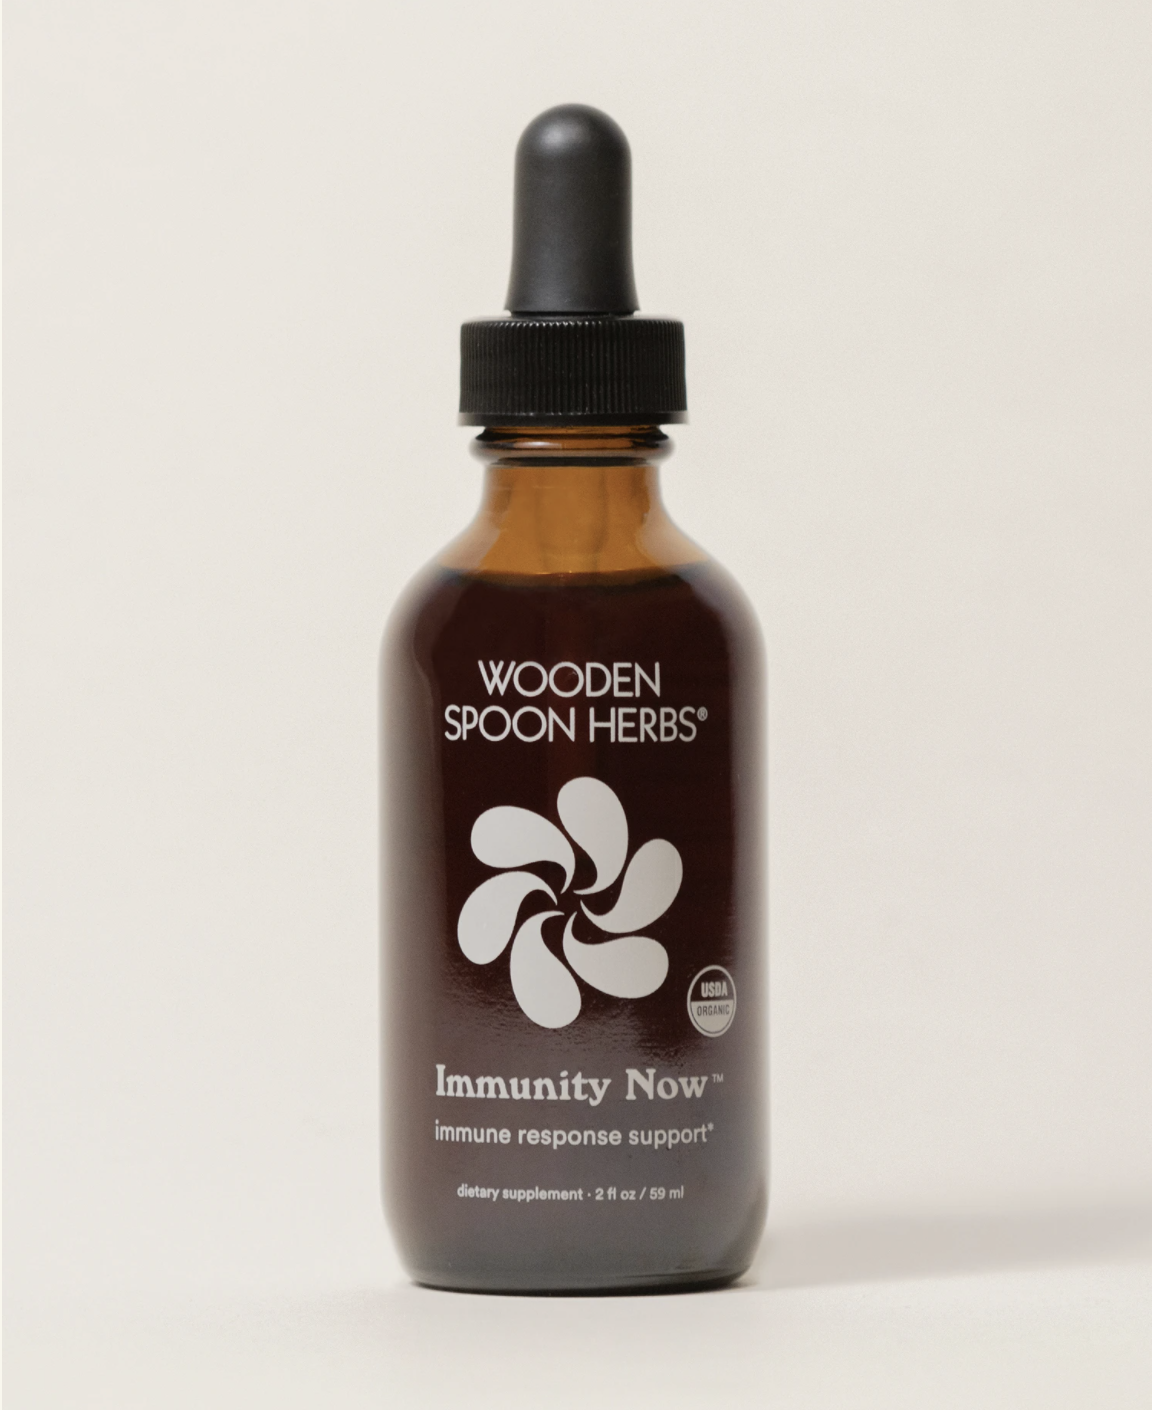 Wooden Spoon Herbs Immunity Now Tincture